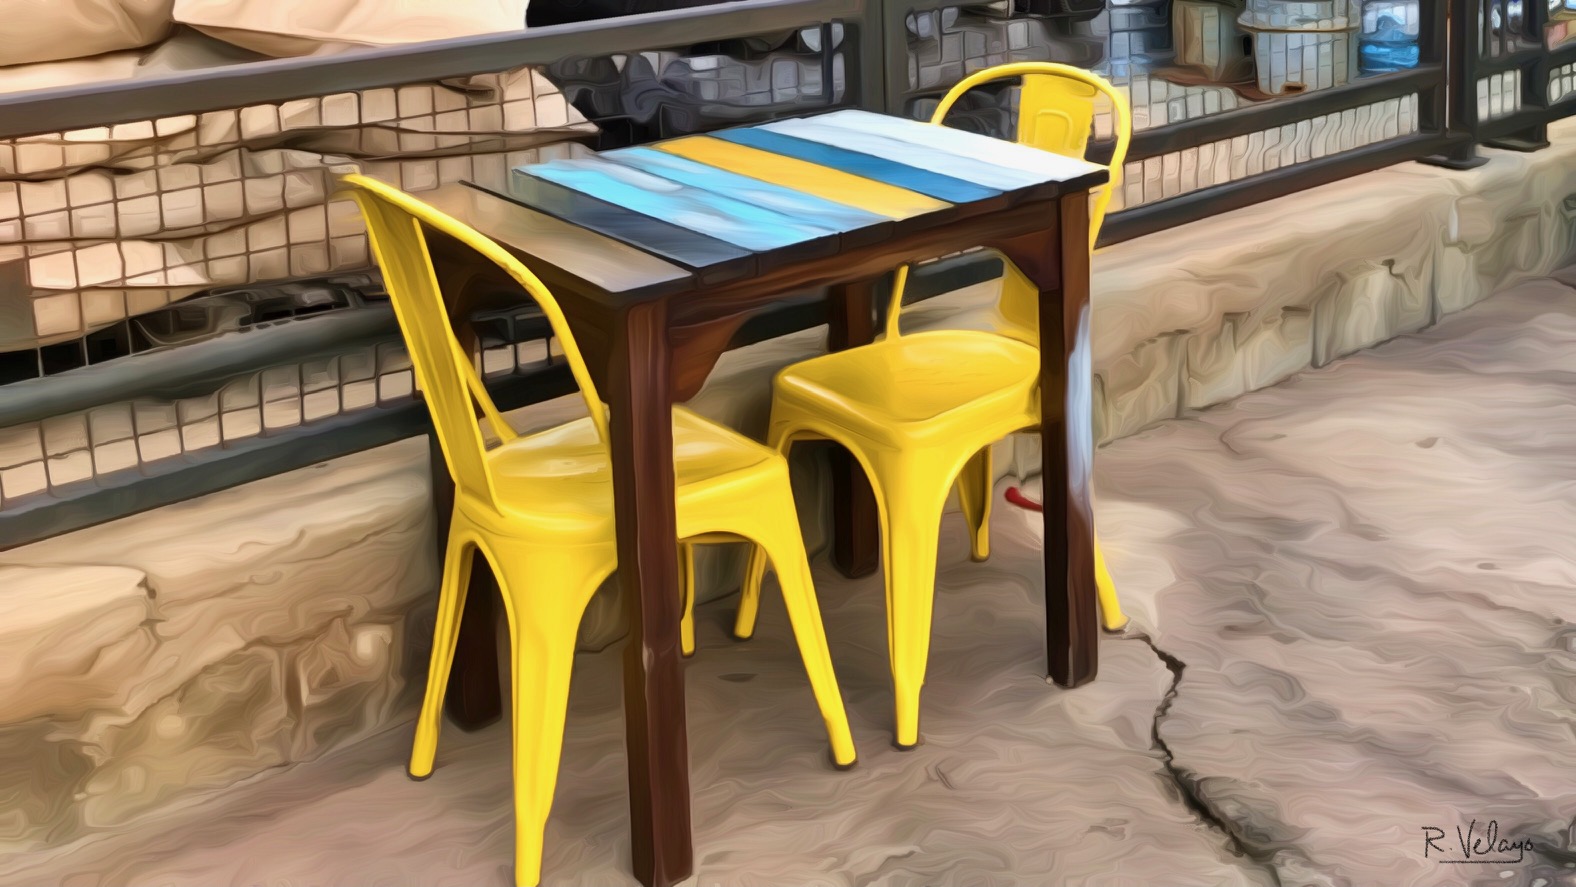 "TWO YELLOW CHAIRS AND TABLE SET AT ANIMAL KINGDOM" [Created: 10/27/2021]